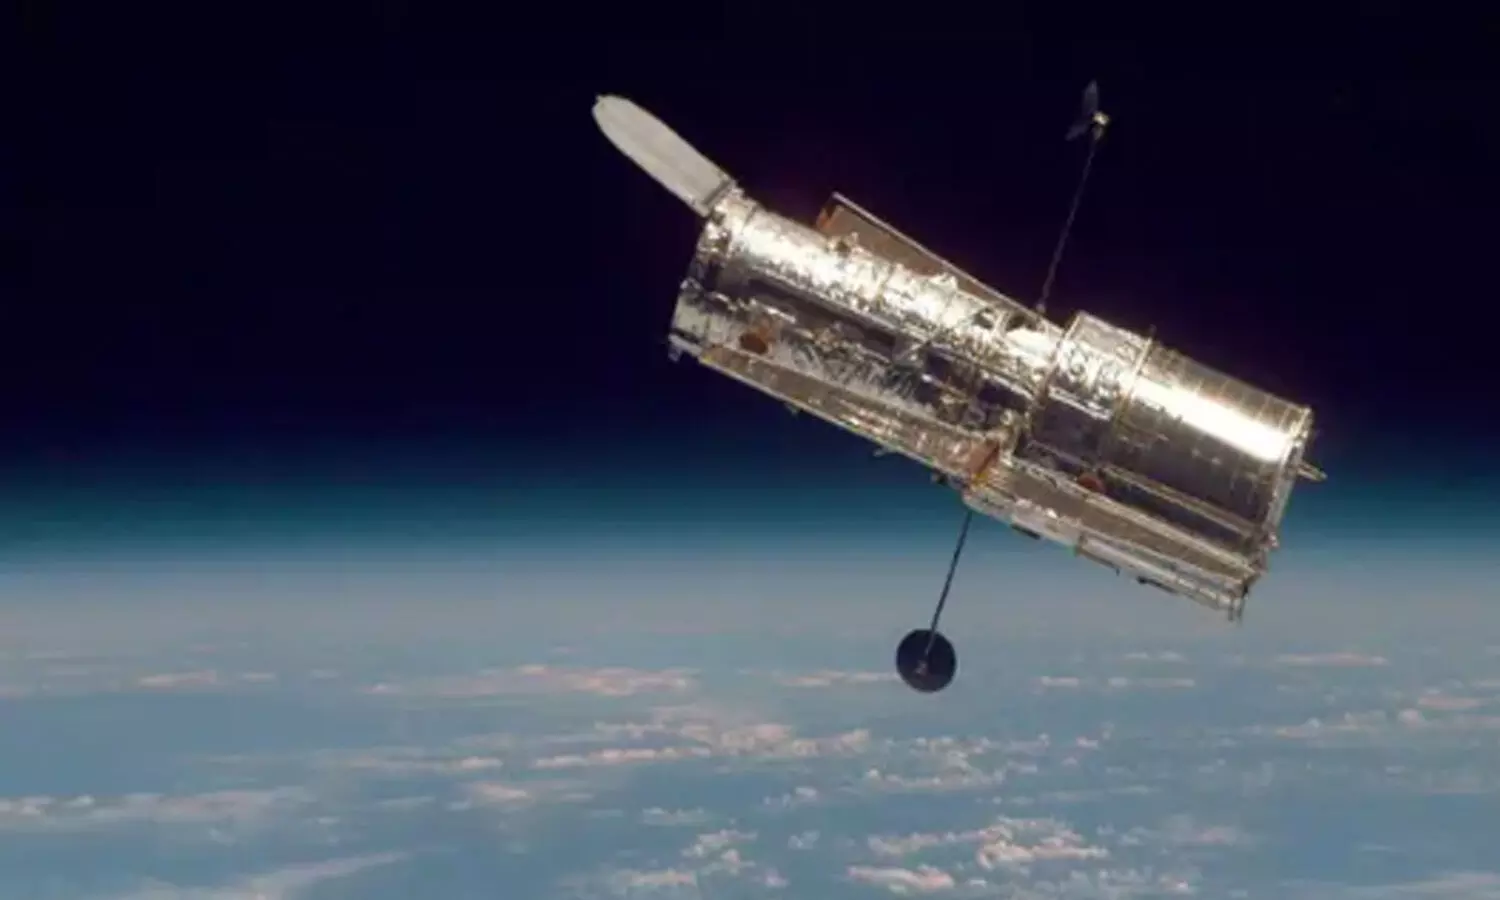 Hubble Telescope records about 1.5 million observations in space before shutting down